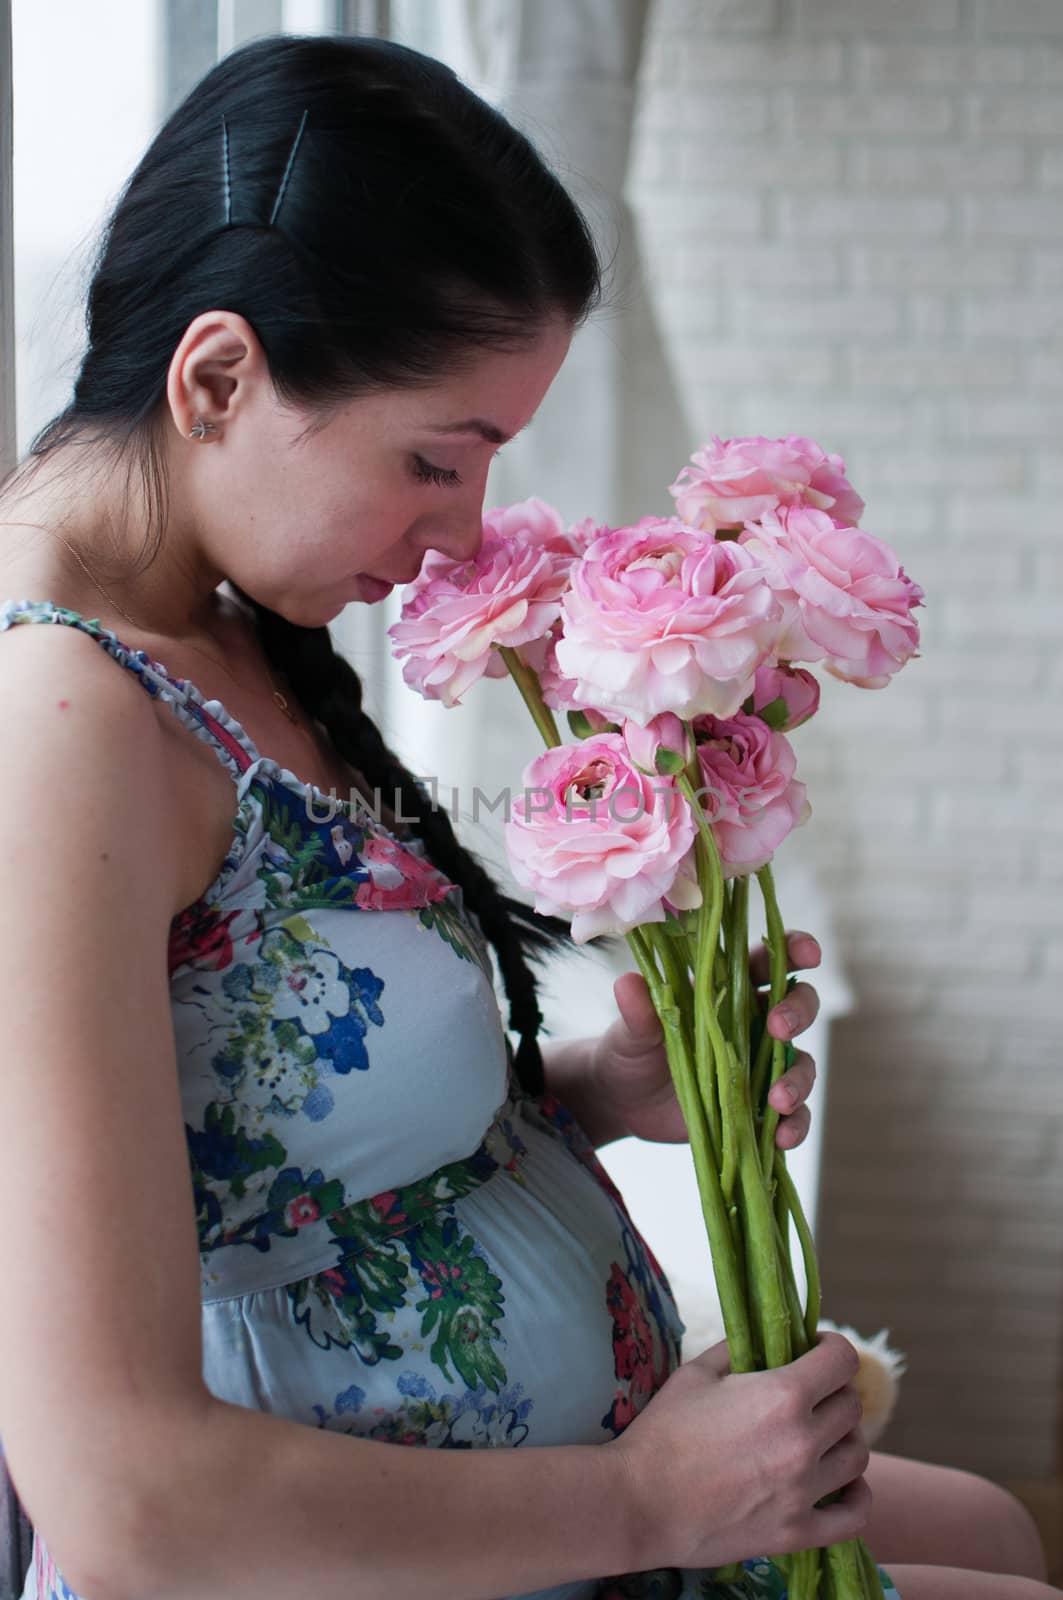 Portrait of the pregnant woman with flowers